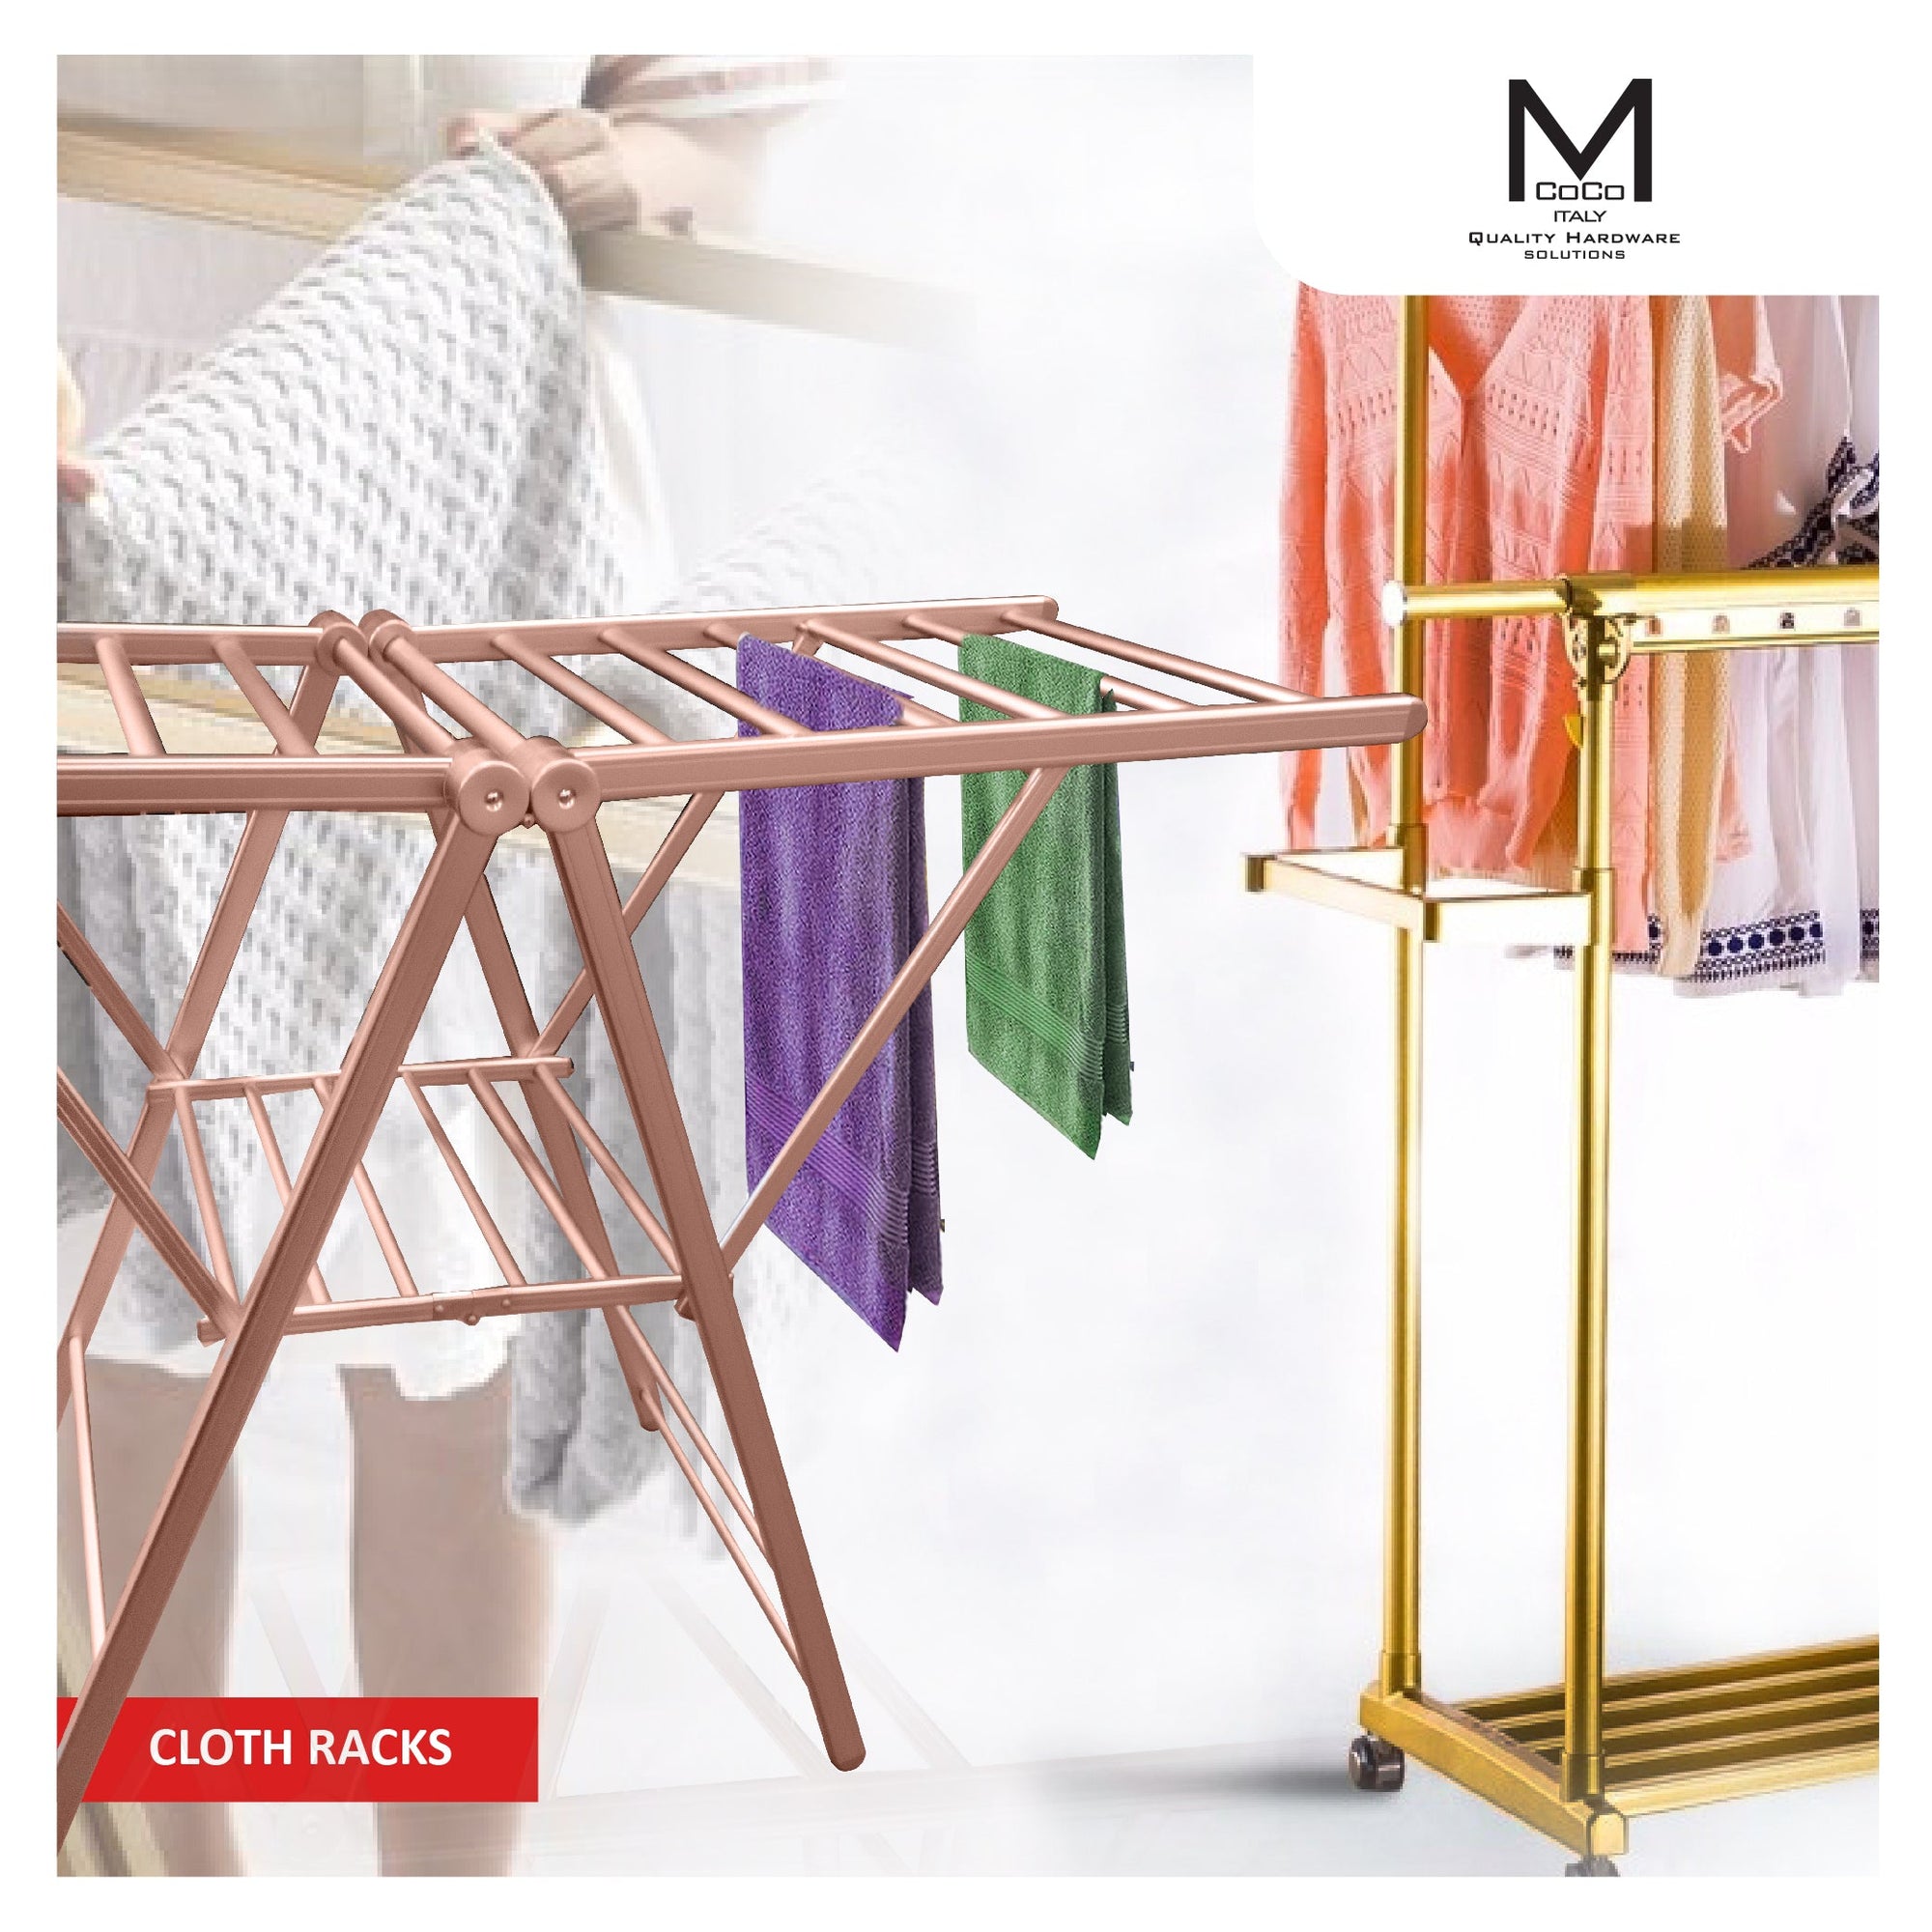 Stylish and durable Mcoco Cloth Racks for organized clothing storage - M. M. Noorbhoy & Co.